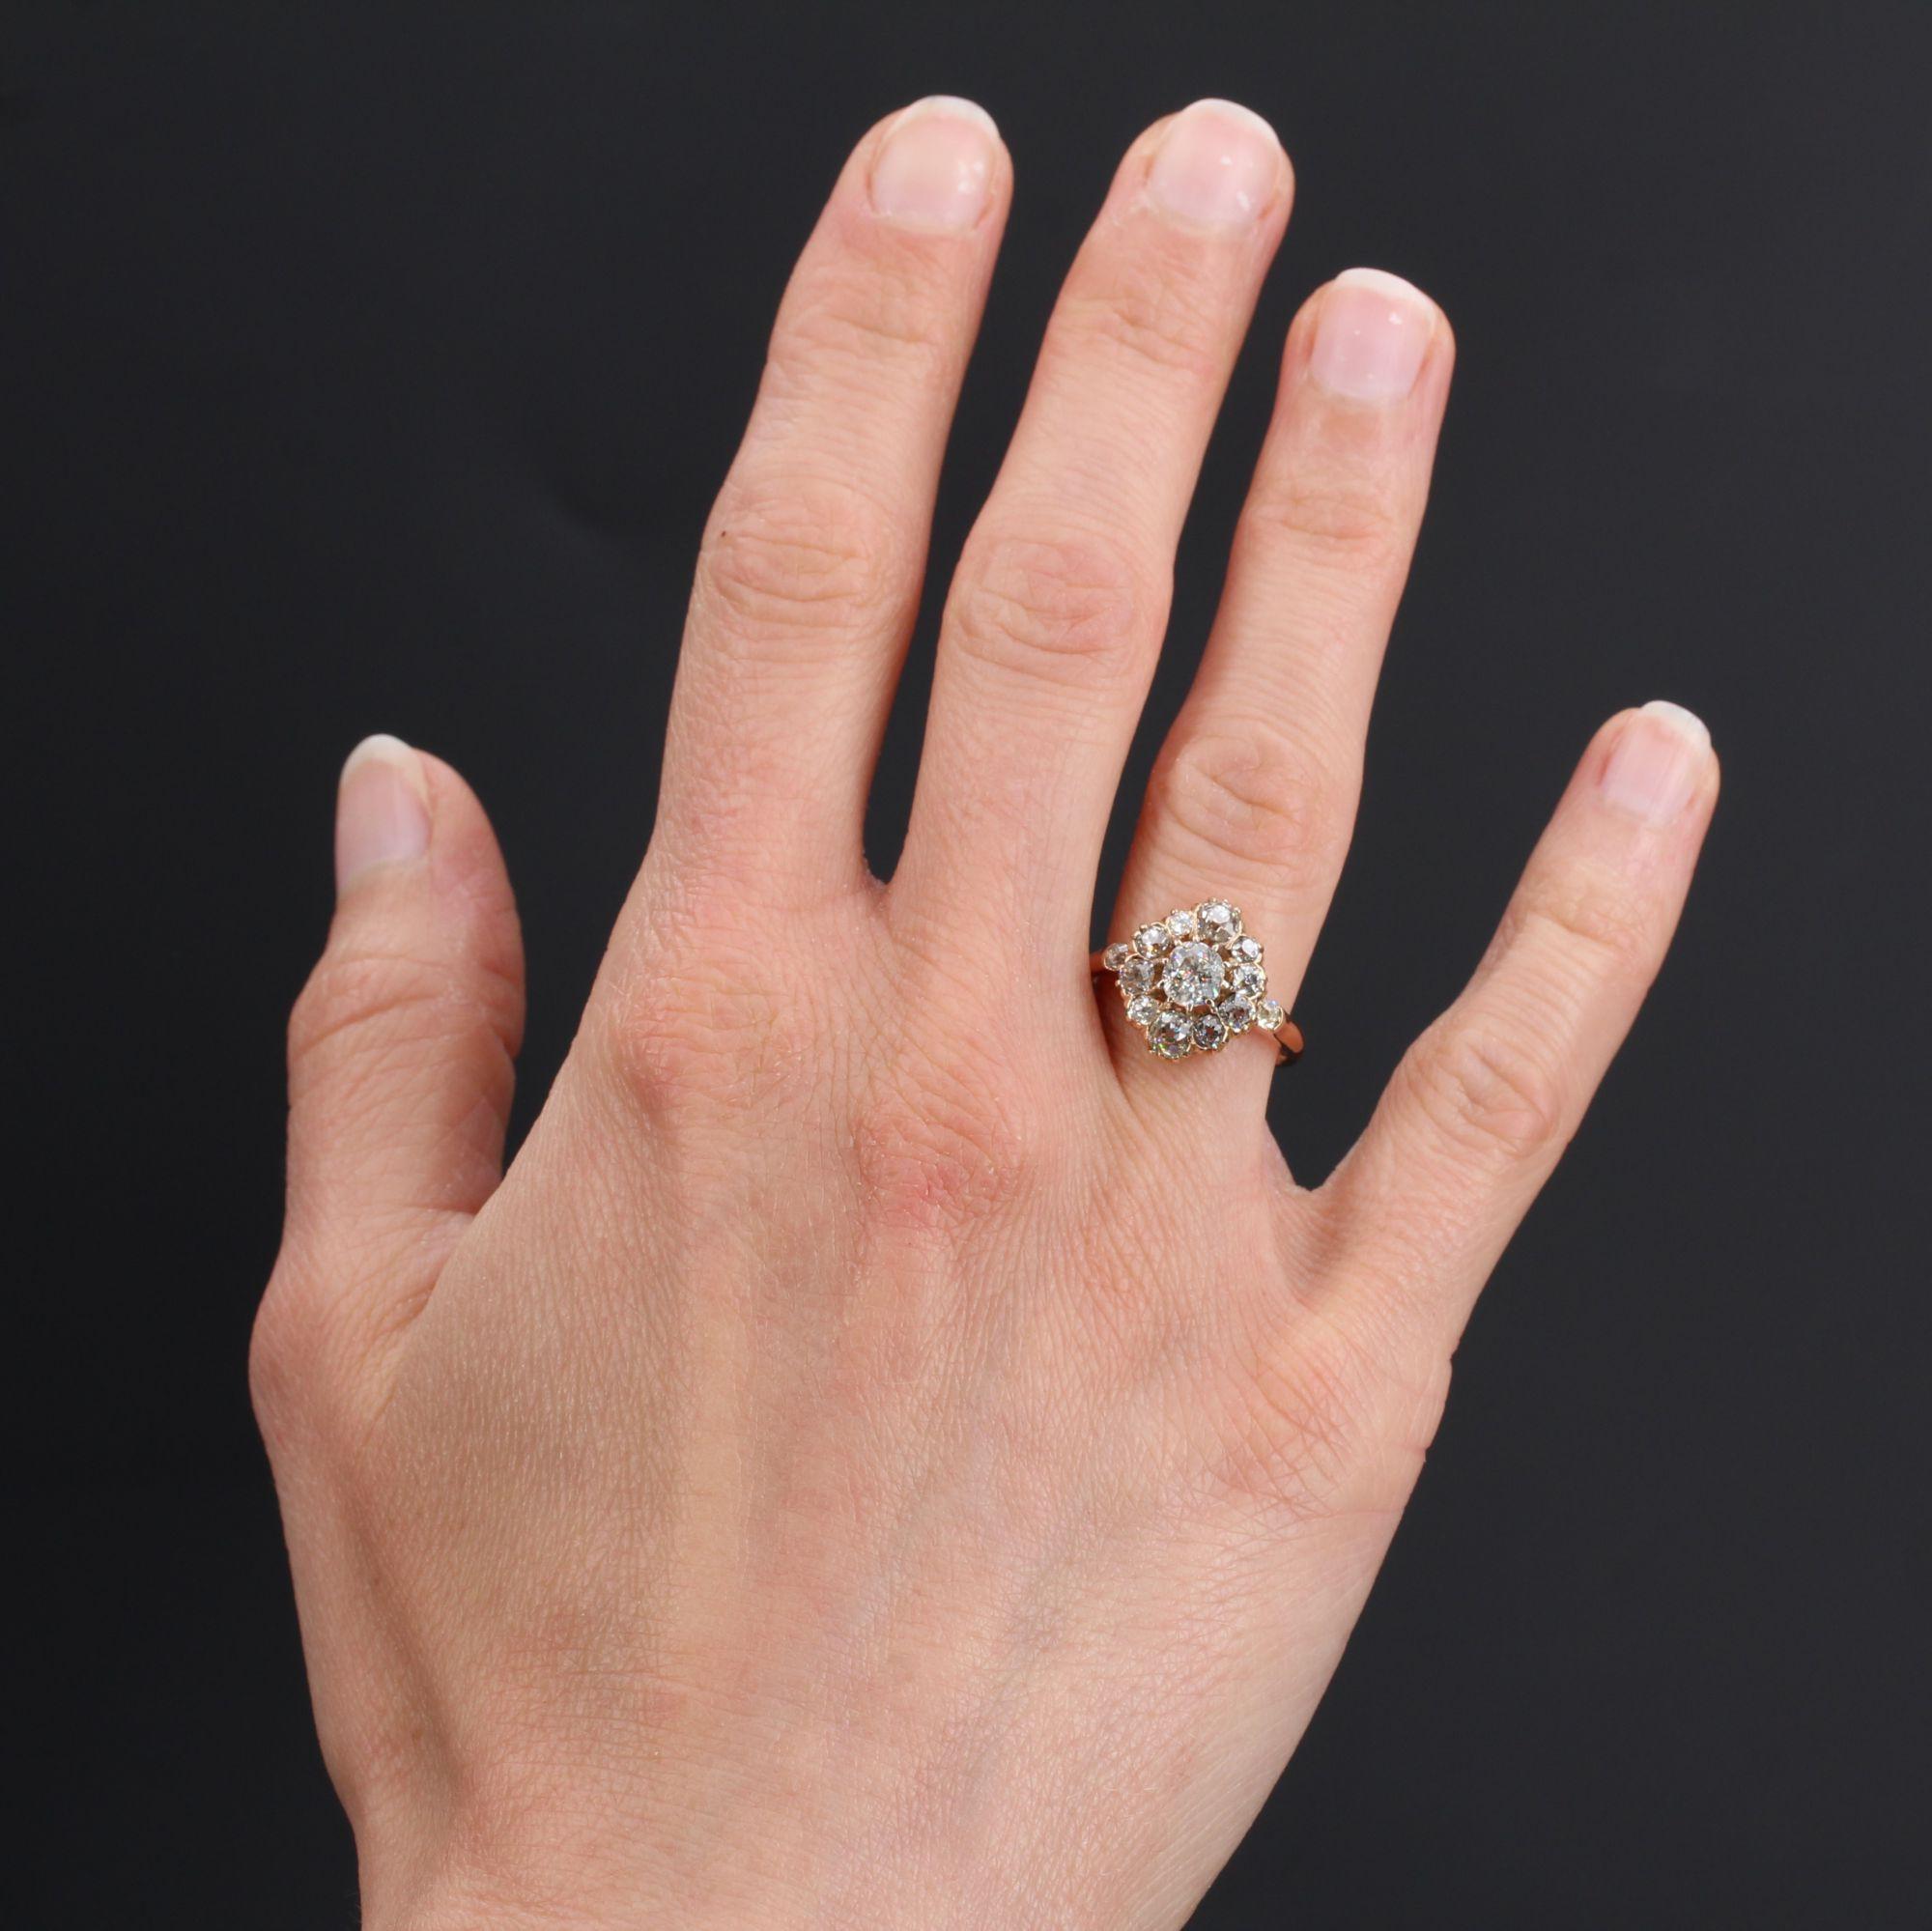  Ring in 14 karat rose gold, shell hallmark.
With a slight marquise shape, this antique ring is entirely set with antique cushion-cut diamonds. On either side, an antique cushion-cut diamond gives the start of the ring.
Weight of the main diamond :